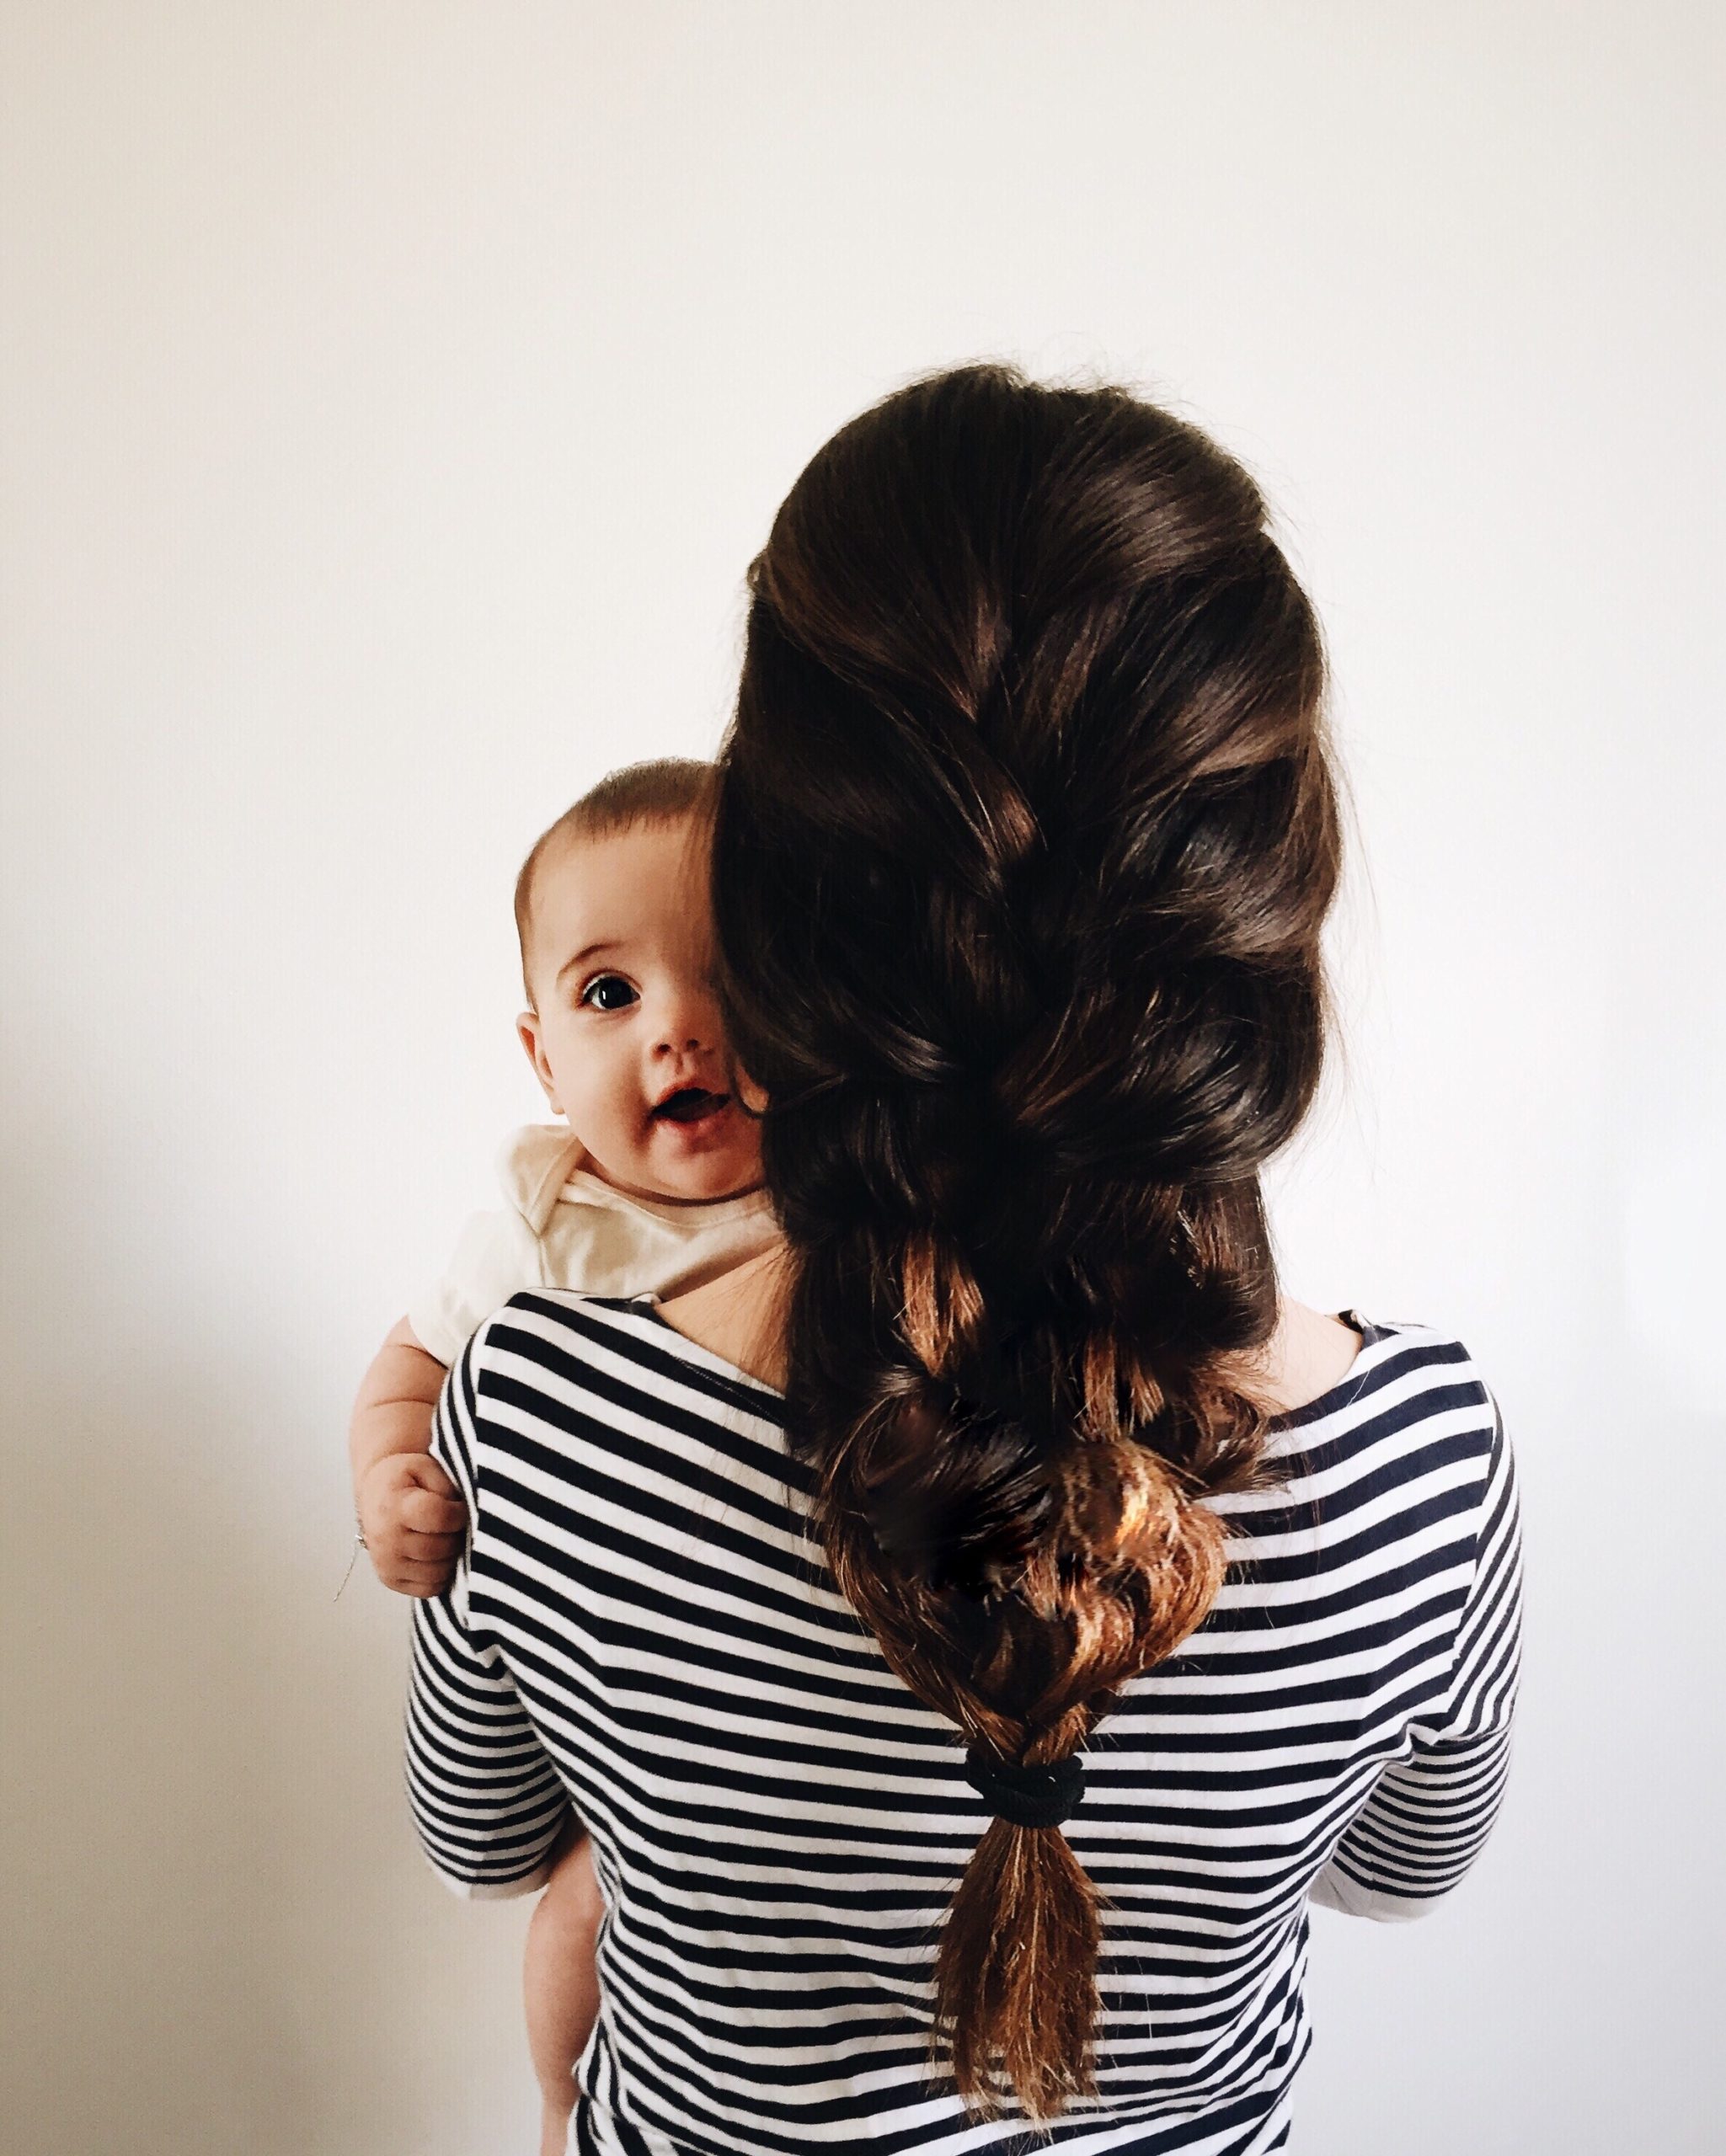 6 Great Hairstyles for Labor and Delivery